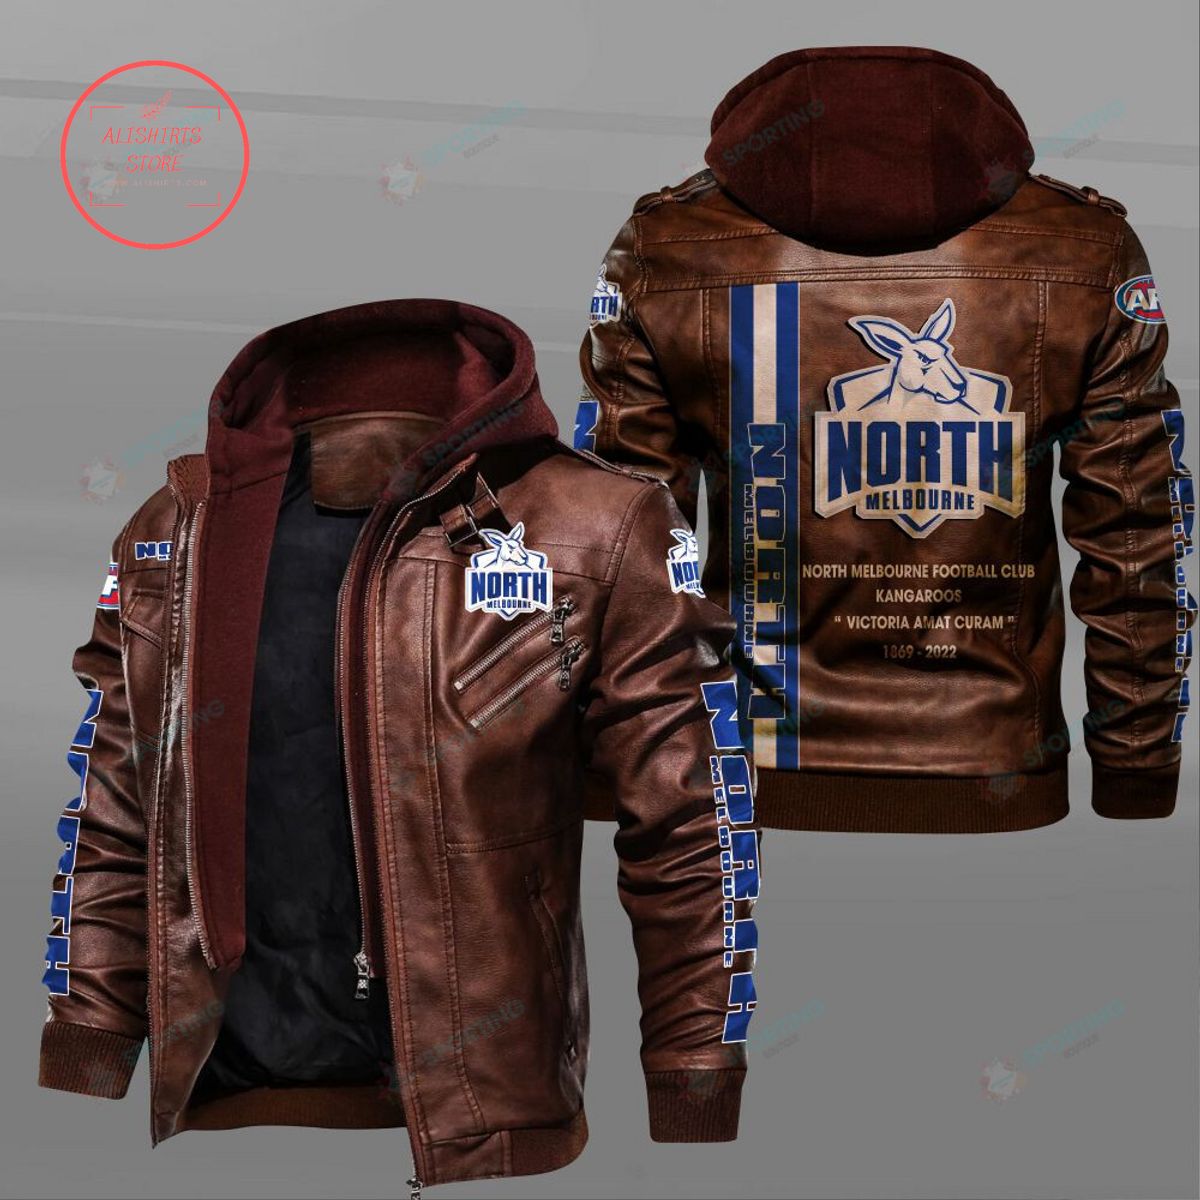 AFL North Melbourne Football Club Motto Leather Jacket Hooded Fleece For Fan